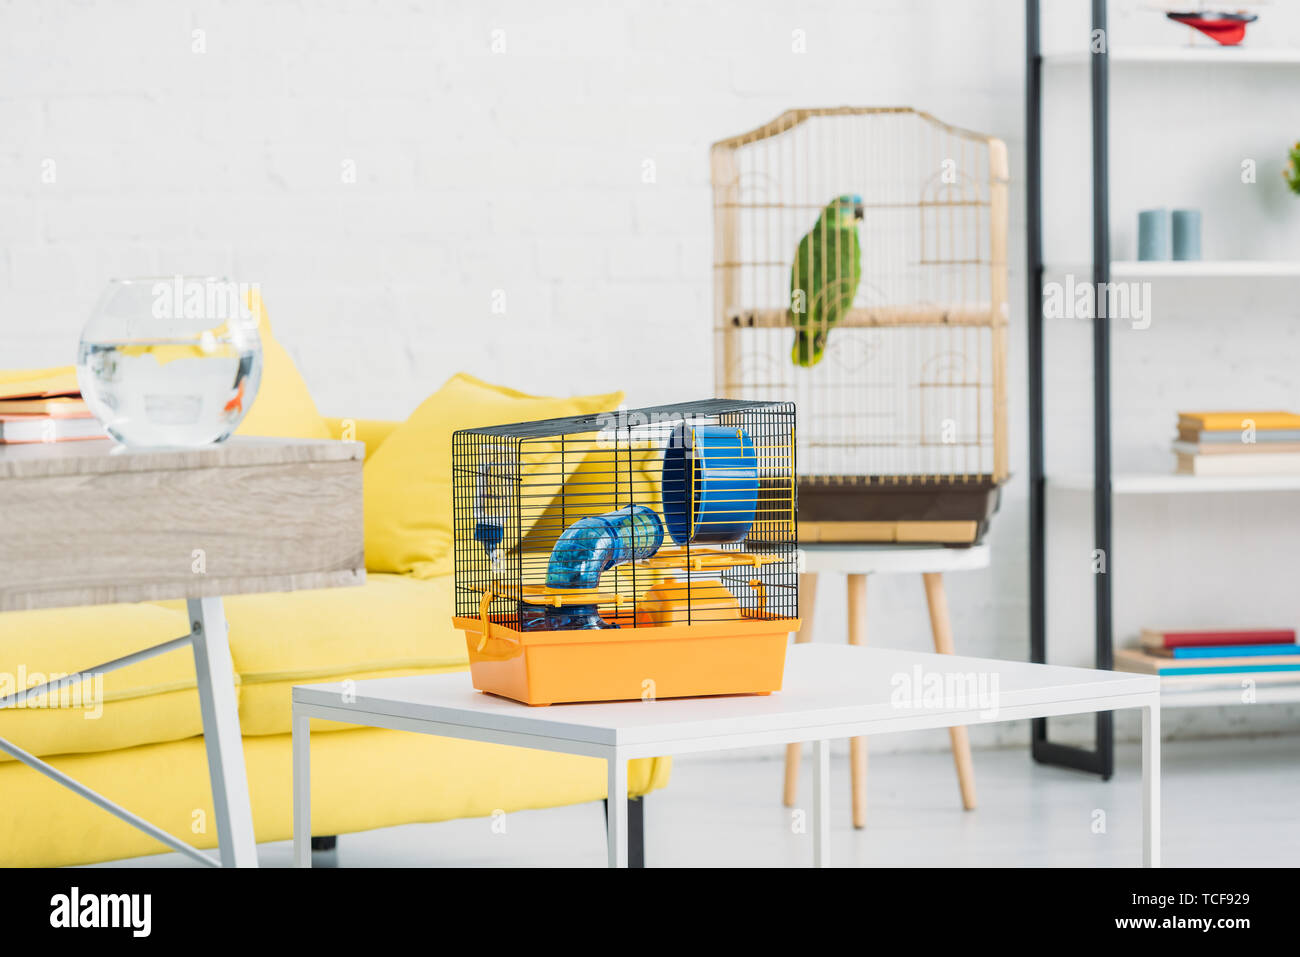 living room with orange pet cage on white table, and green parrot in bird cage Stock Photo